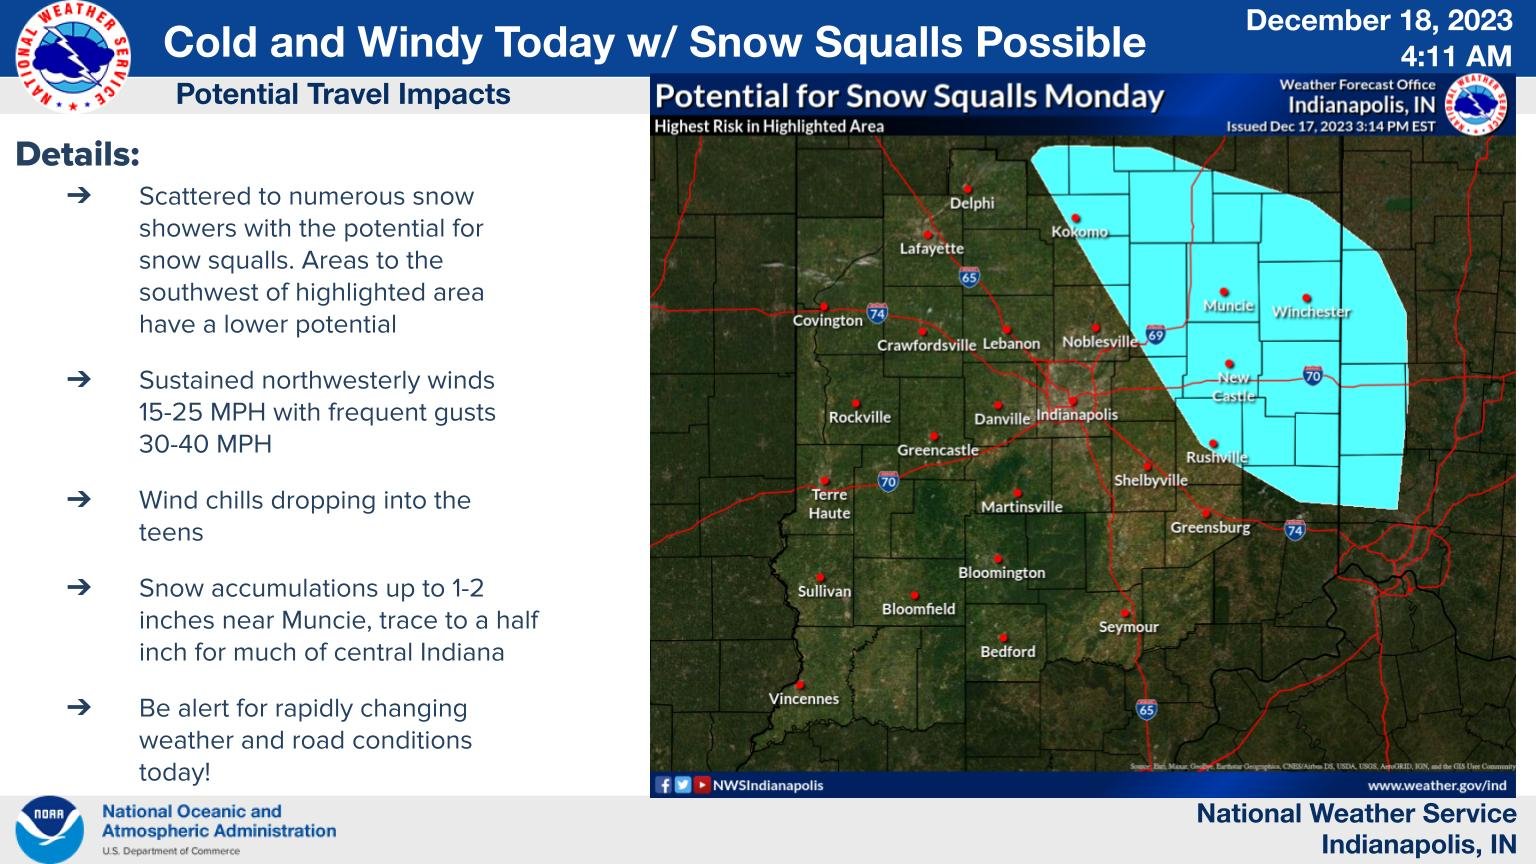 Cold Front Sweeps In, Bringing Chilly Winds, Flurries